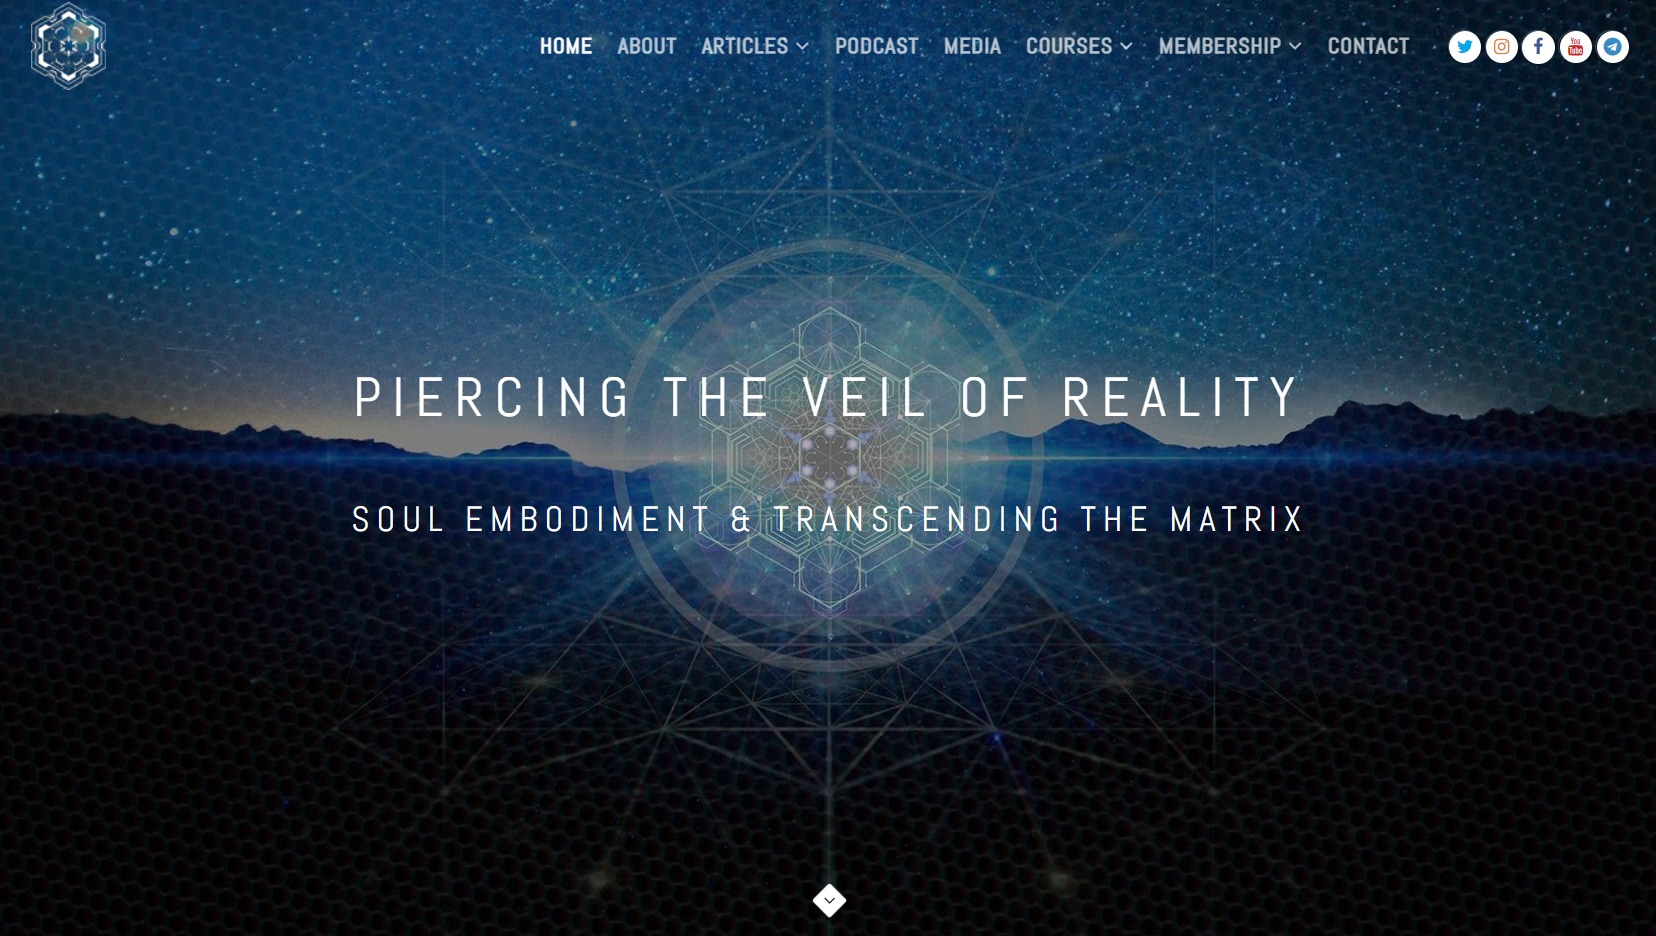 Piercing the Veil of Reality